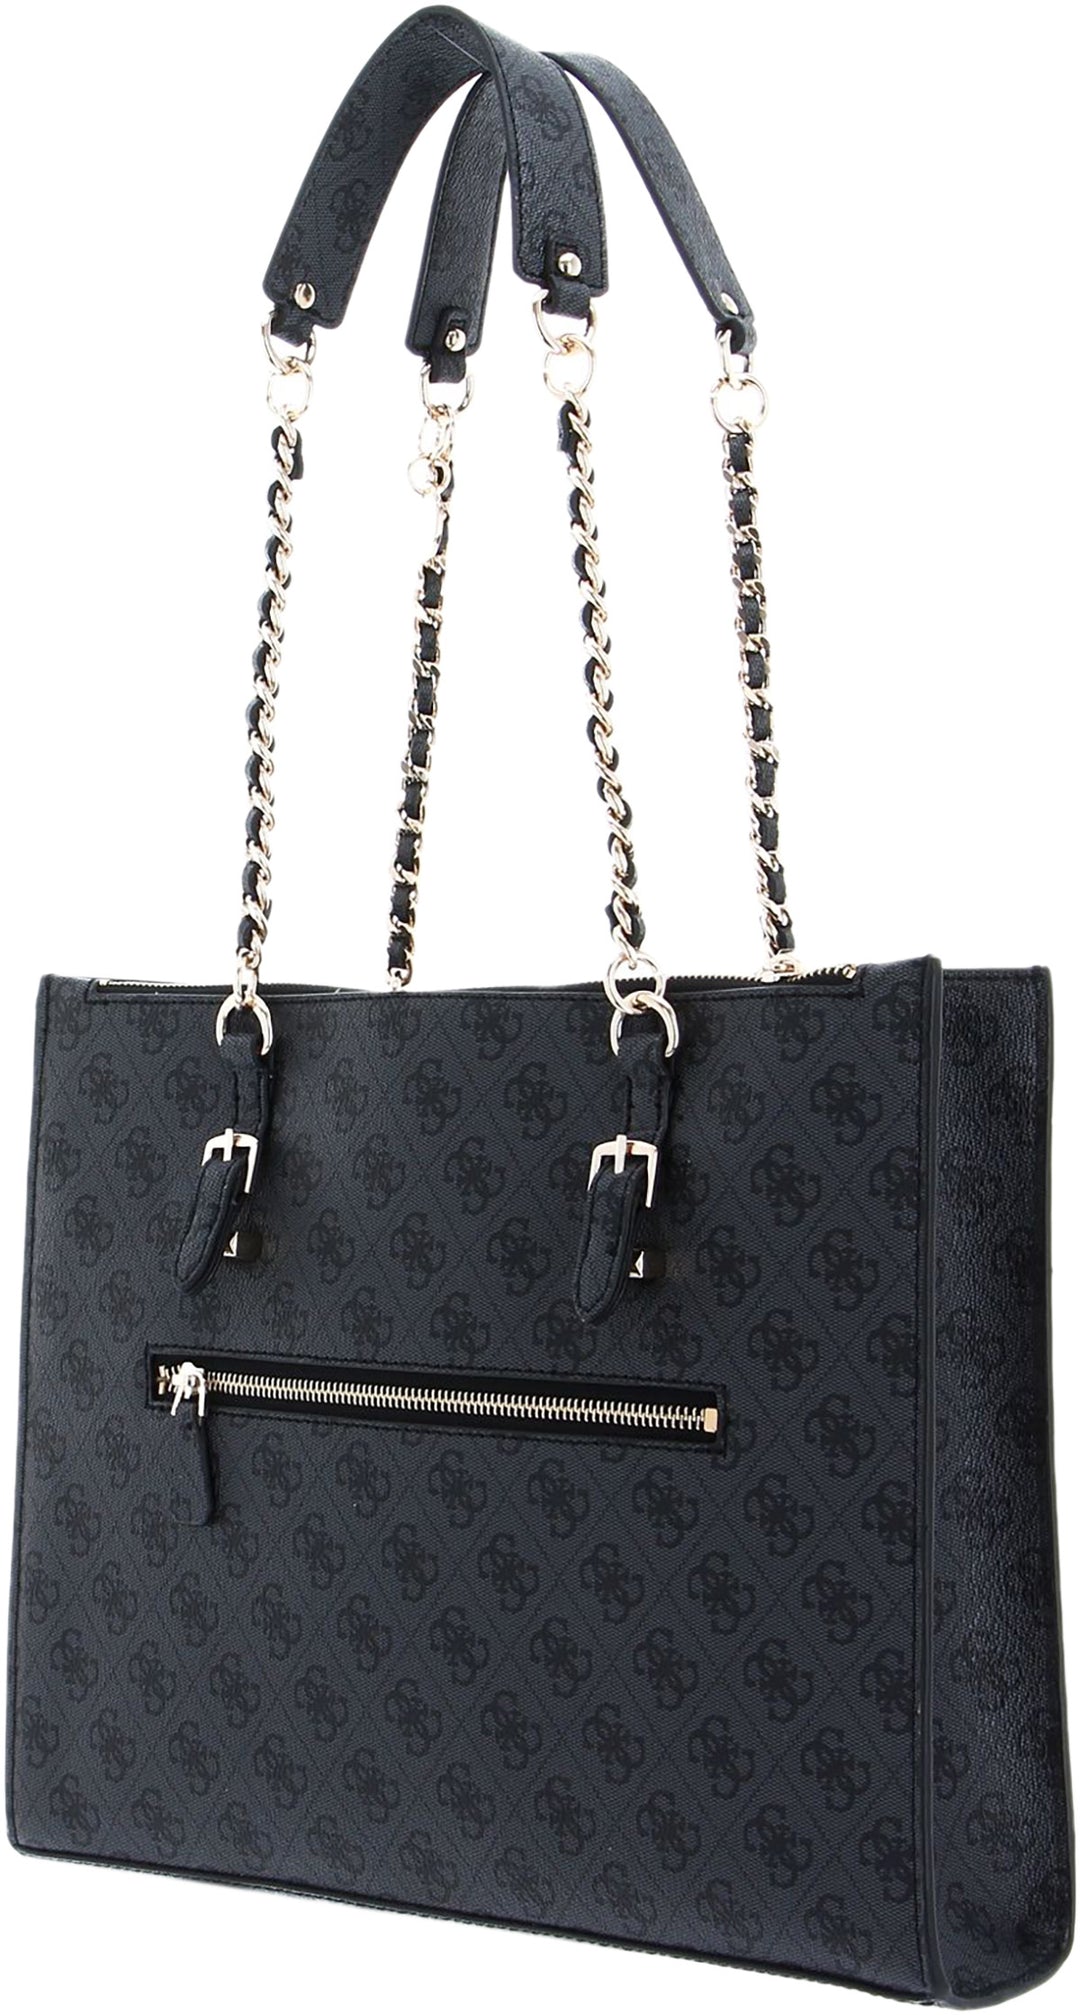 Guess Didi Society Tote Bag In Coal For Women